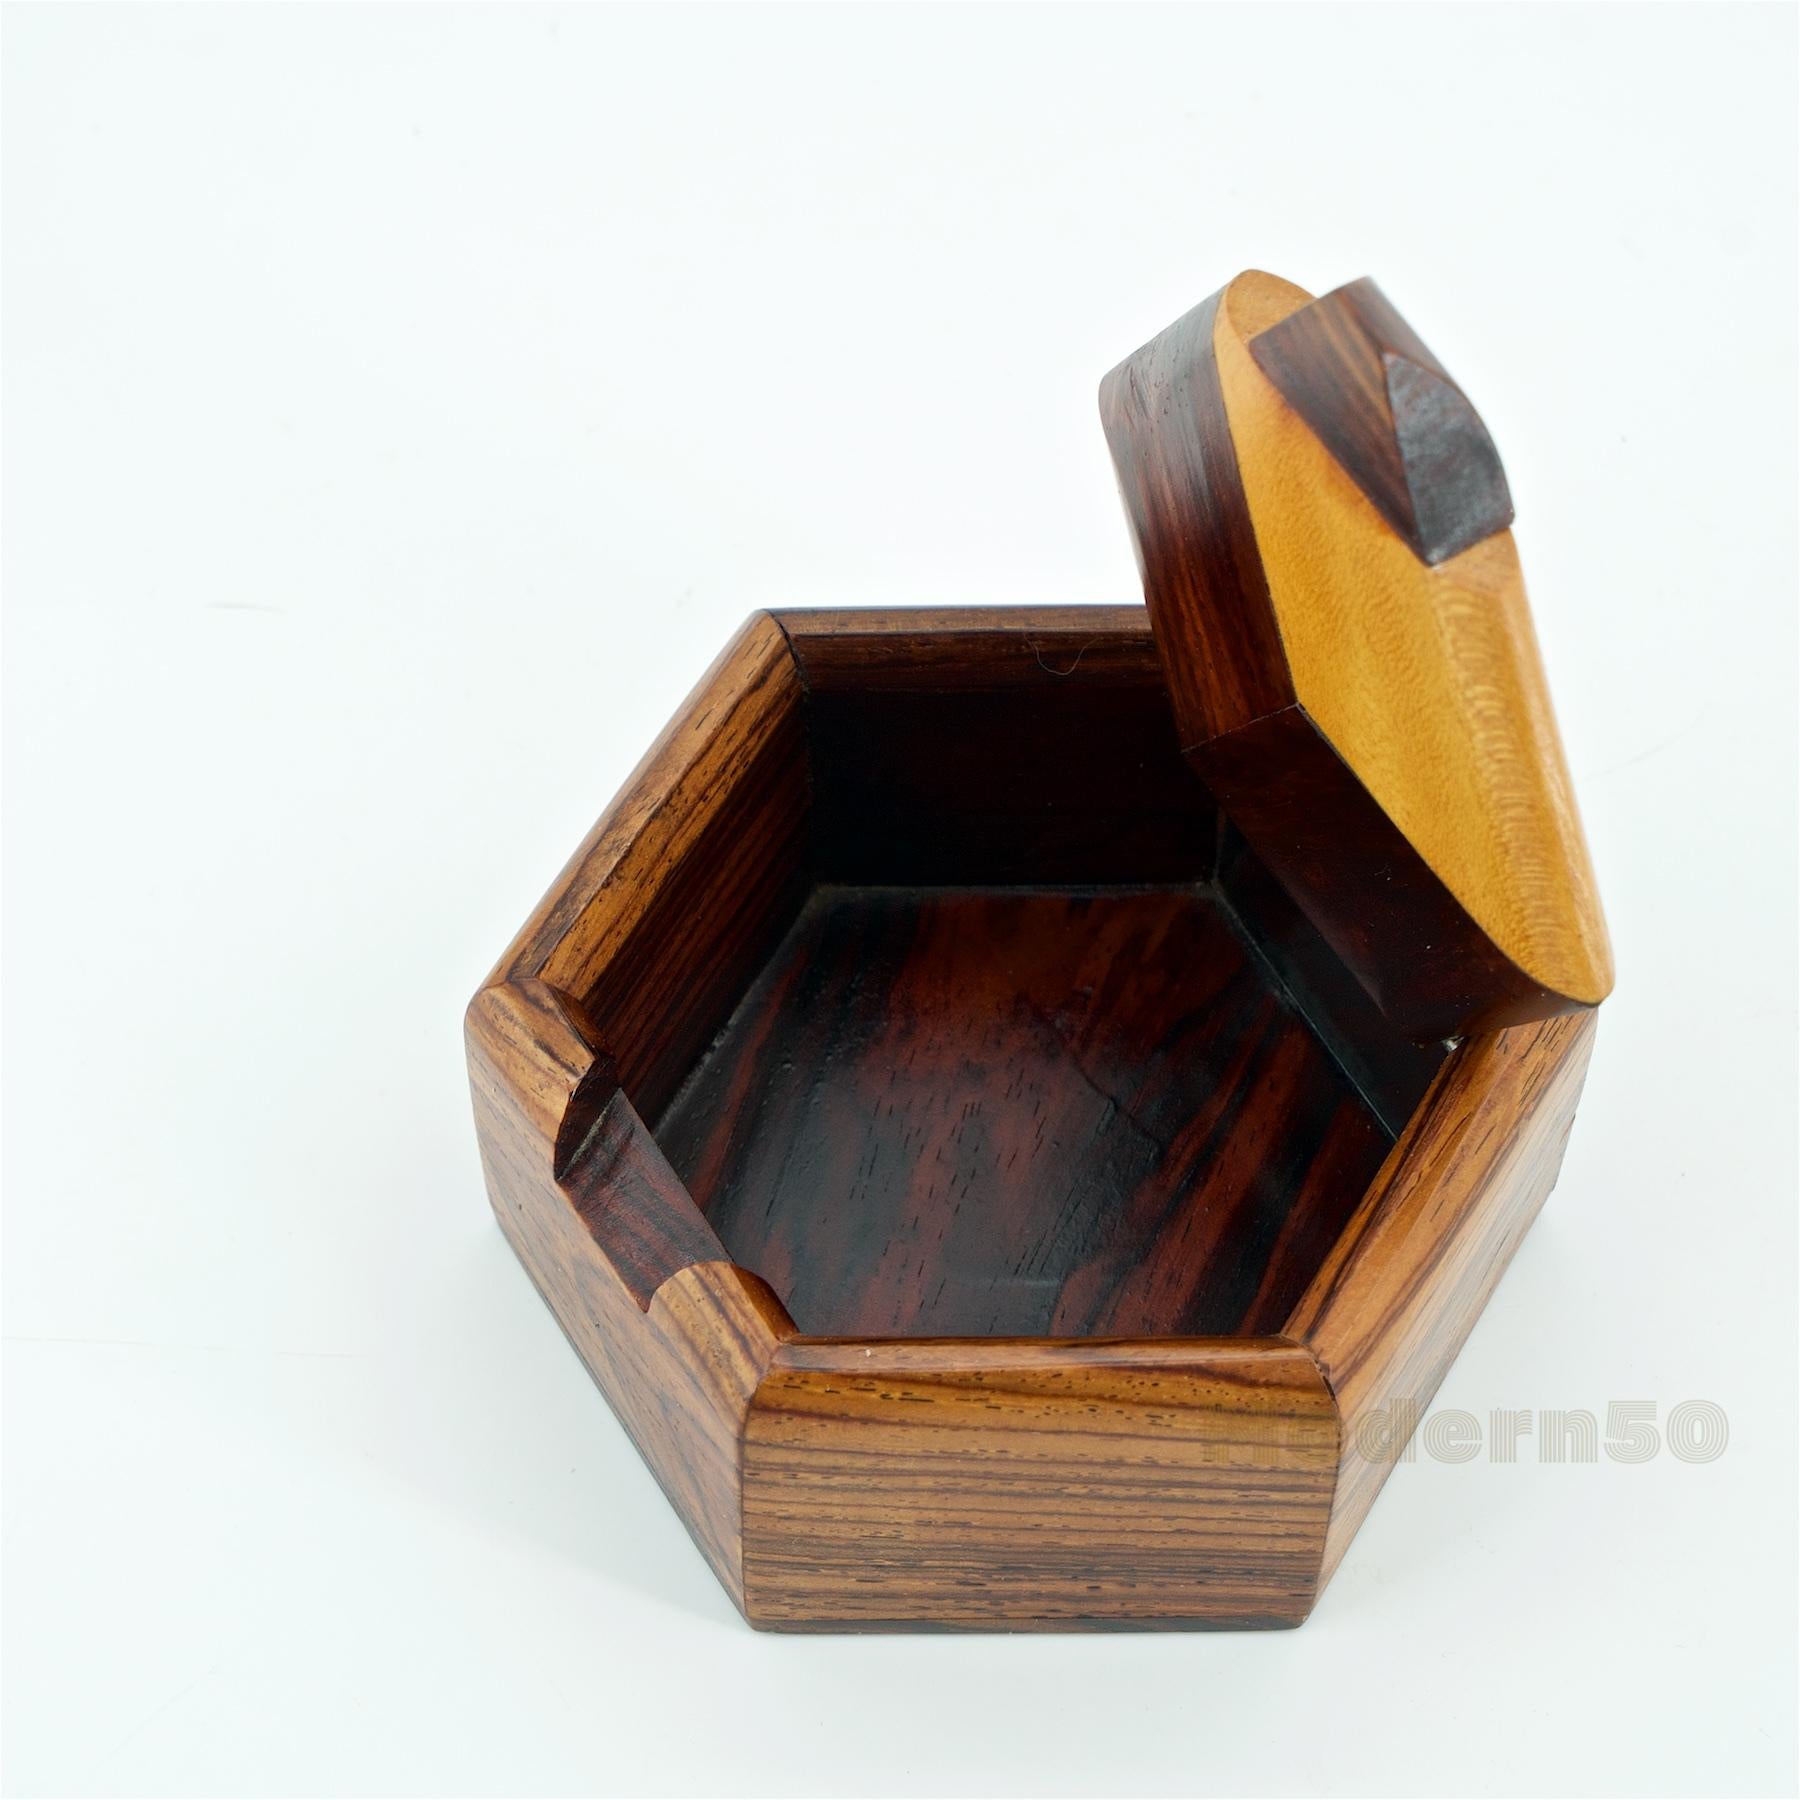 1960s Geometric Jewelry Trinket Geometric Box Mexican Craft Eclectic Woodworker In Good Condition For Sale In Hyattsville, MD